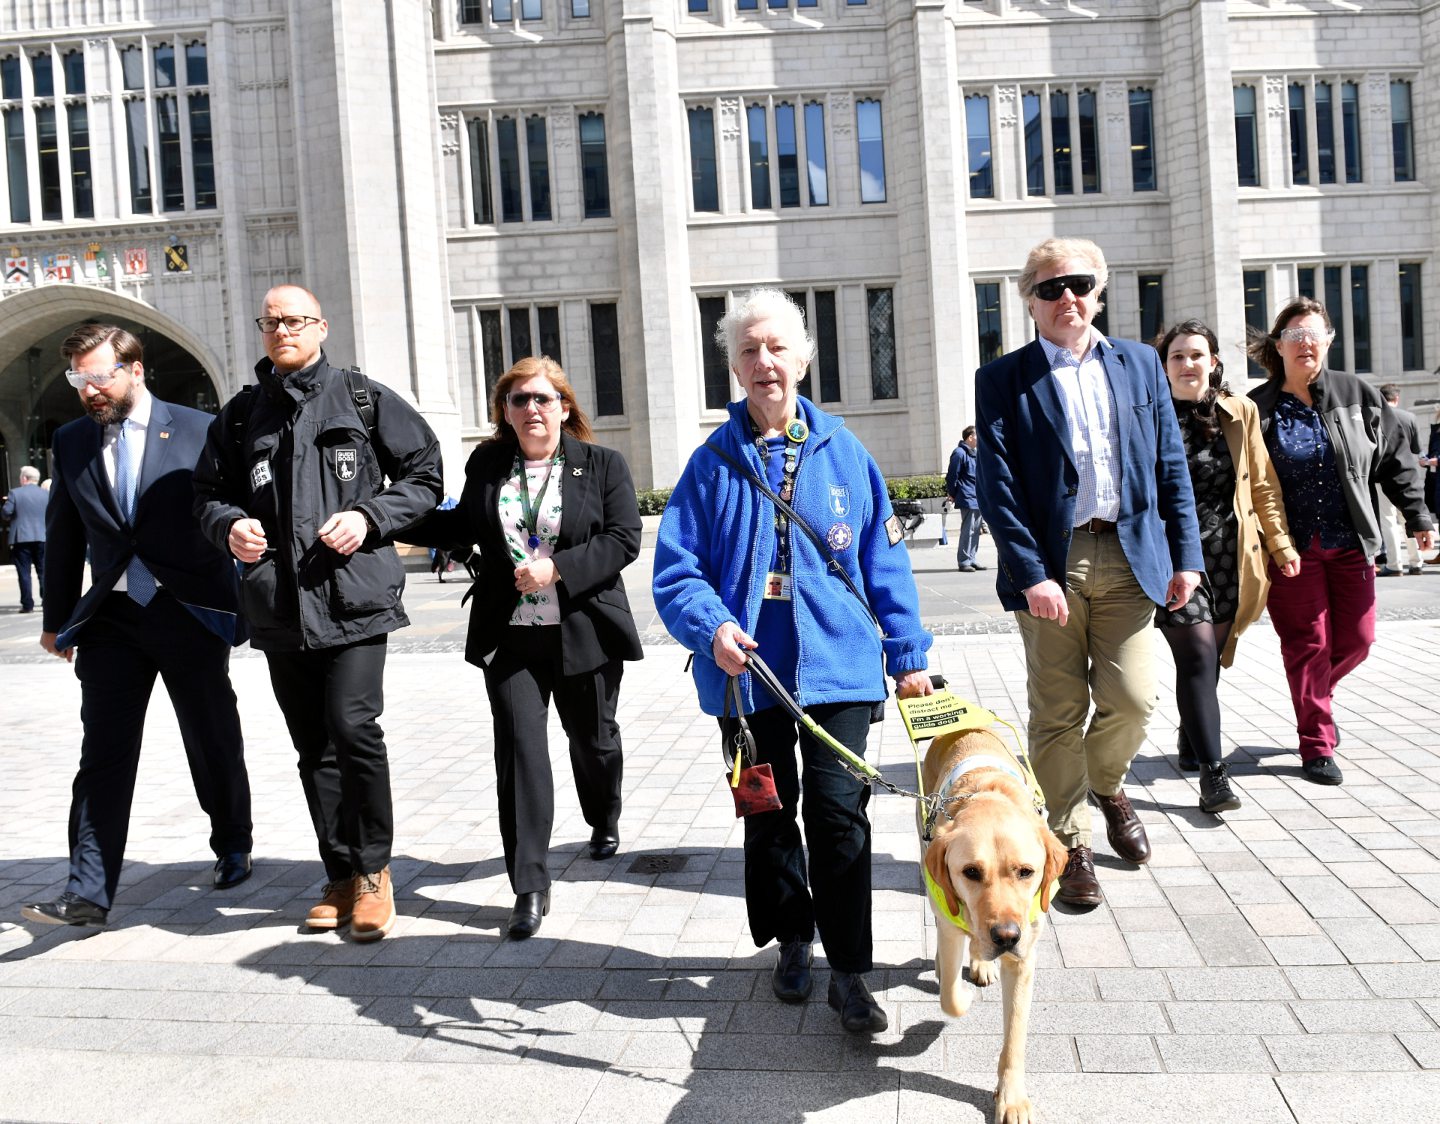 Pictured - L-R Cllr John Wheeler, Guide Niall Foles, Cllr Jackie Dunbar, Mary Rasmusen with her guide dog Vince, Cllr Ian Yuill, Guide Cate Vallis and Cllr Sandra MacDonald cross the road.    
Picture by Kami Thomson